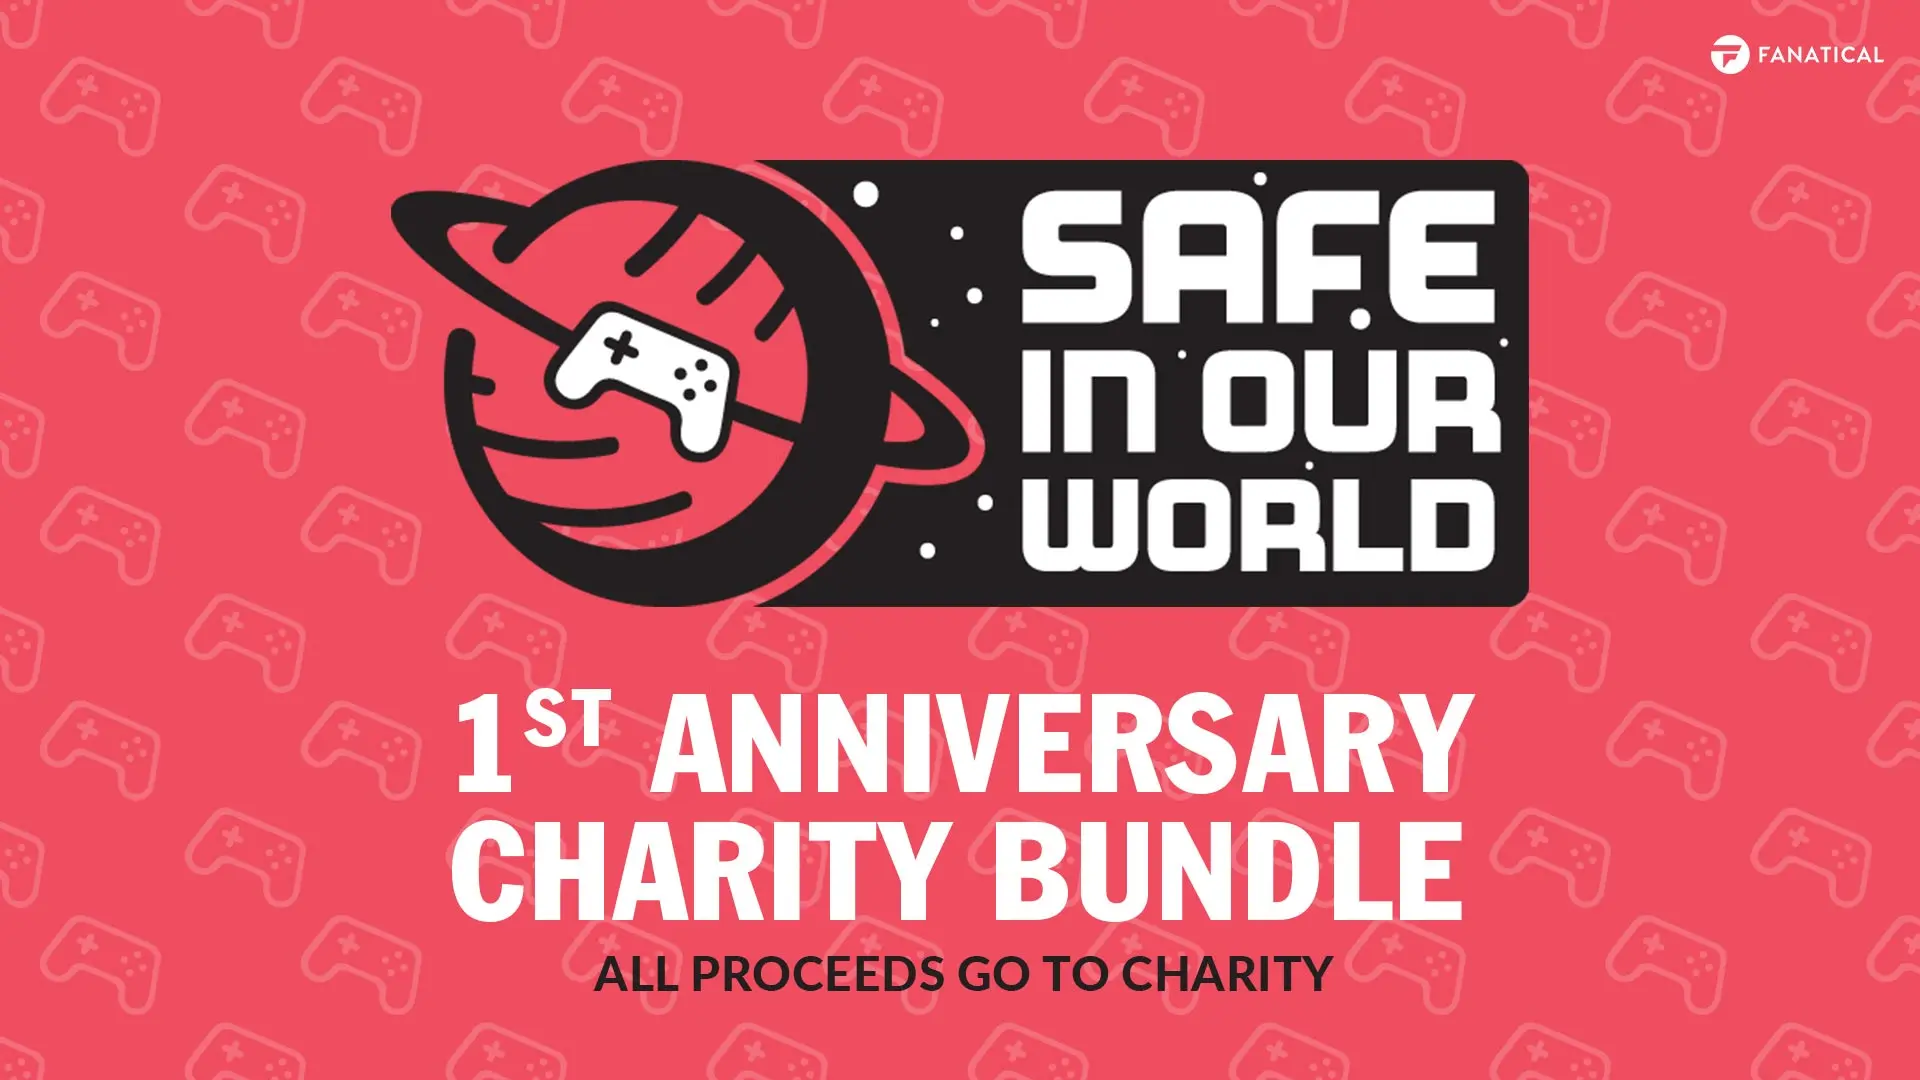 Fanatical Safe in Our World 1st Anniversary Charity Bundle